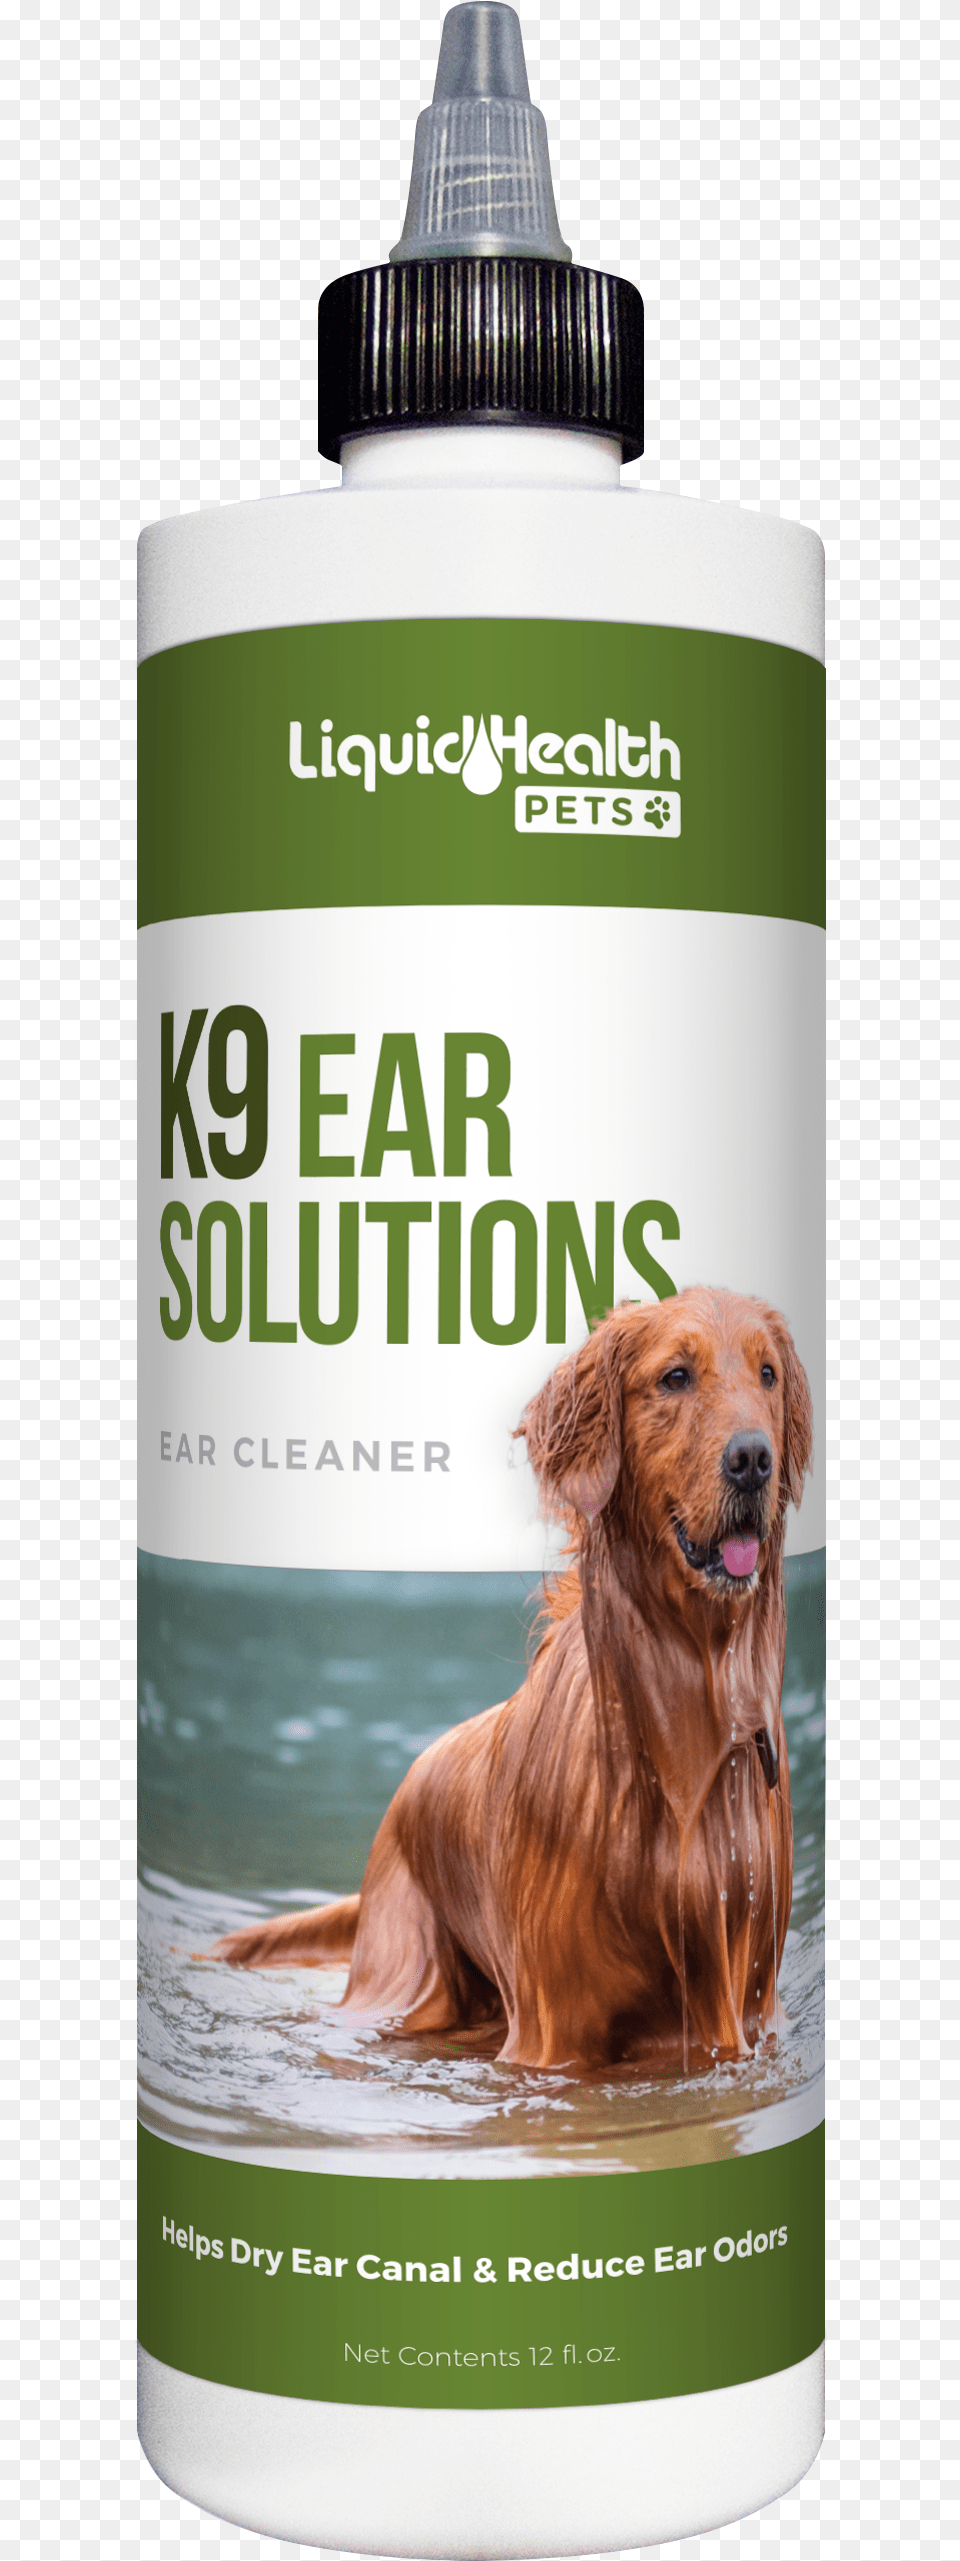 Ear Solutions Motion, Animal, Pet, Canine, Dog Png Image